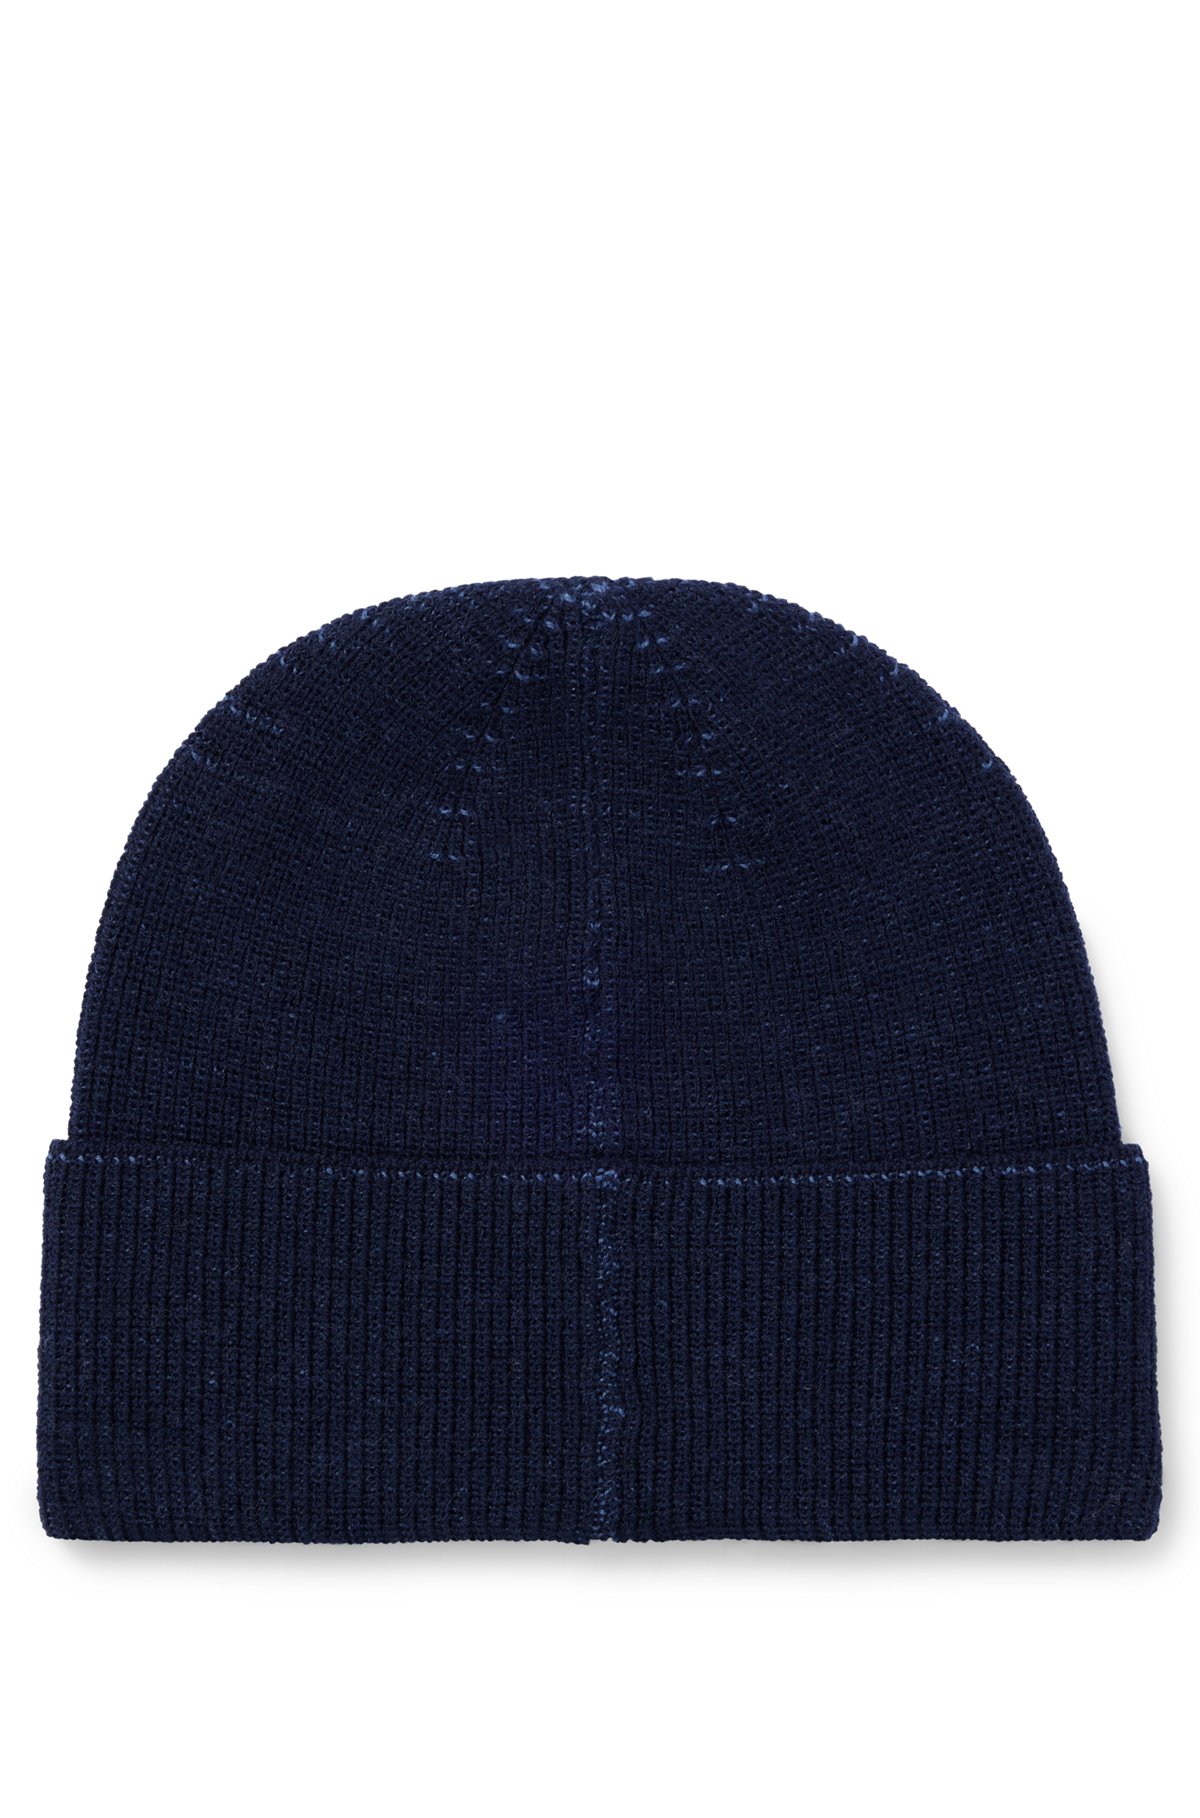 BOSS - Beanie hat in wool with structured logo